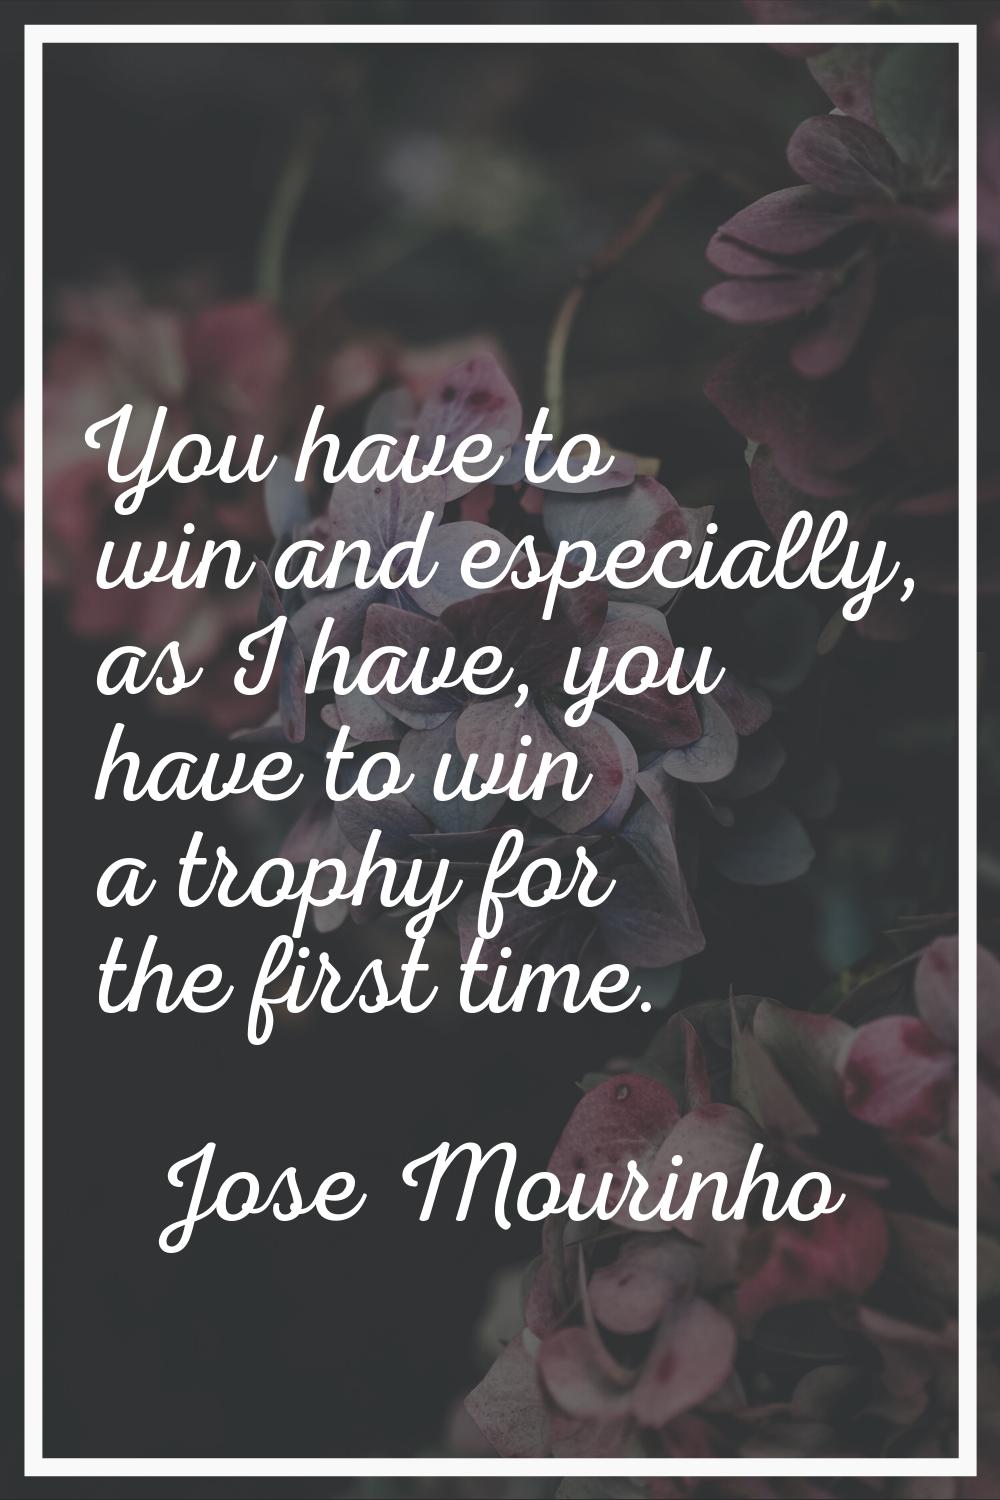 You have to win and especially, as I have, you have to win a trophy for the first time.